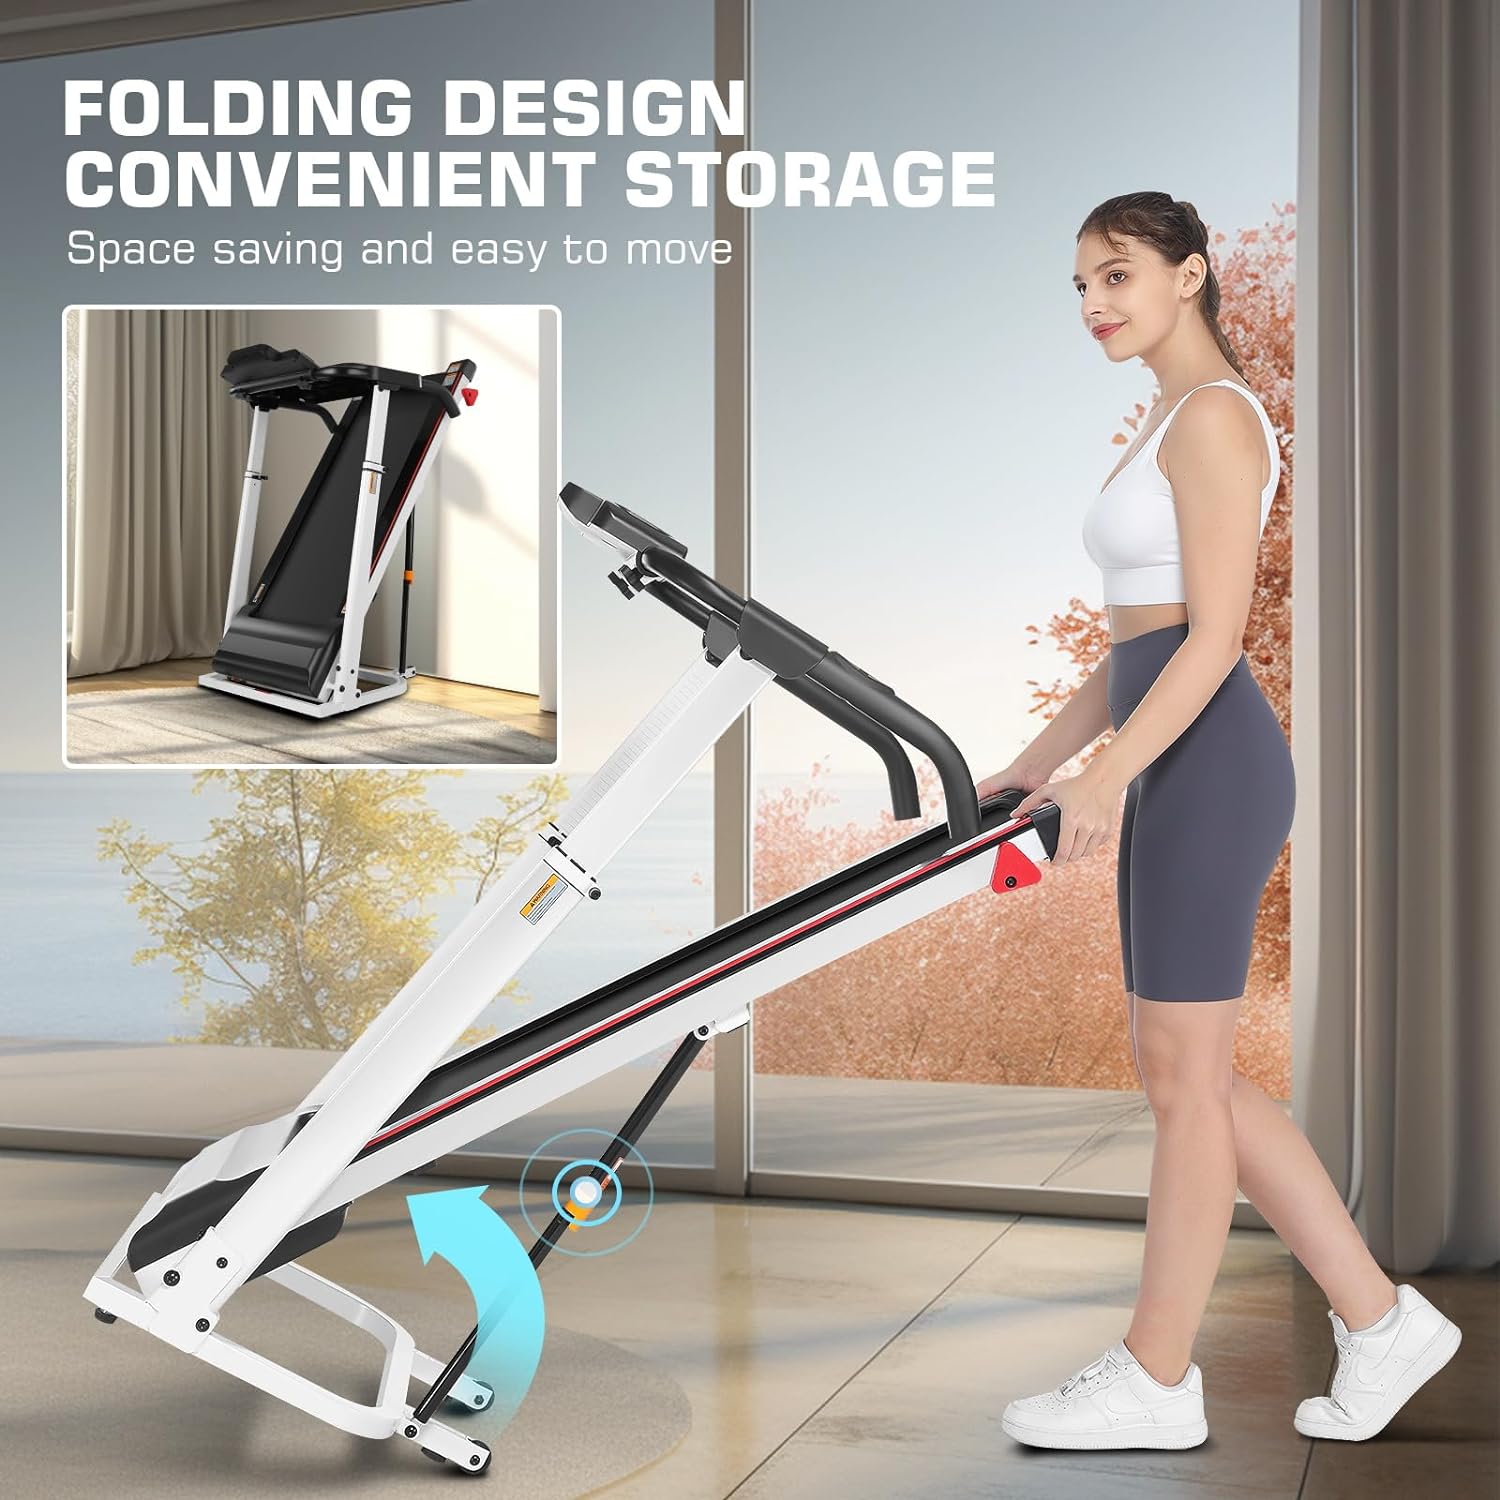 funmily 3 in 1 Foldable Treadmill with Removable Desk&Adjustable Height,Powerful Home/offie/Gym Incline Treadmill 300LBS Weight Capacity